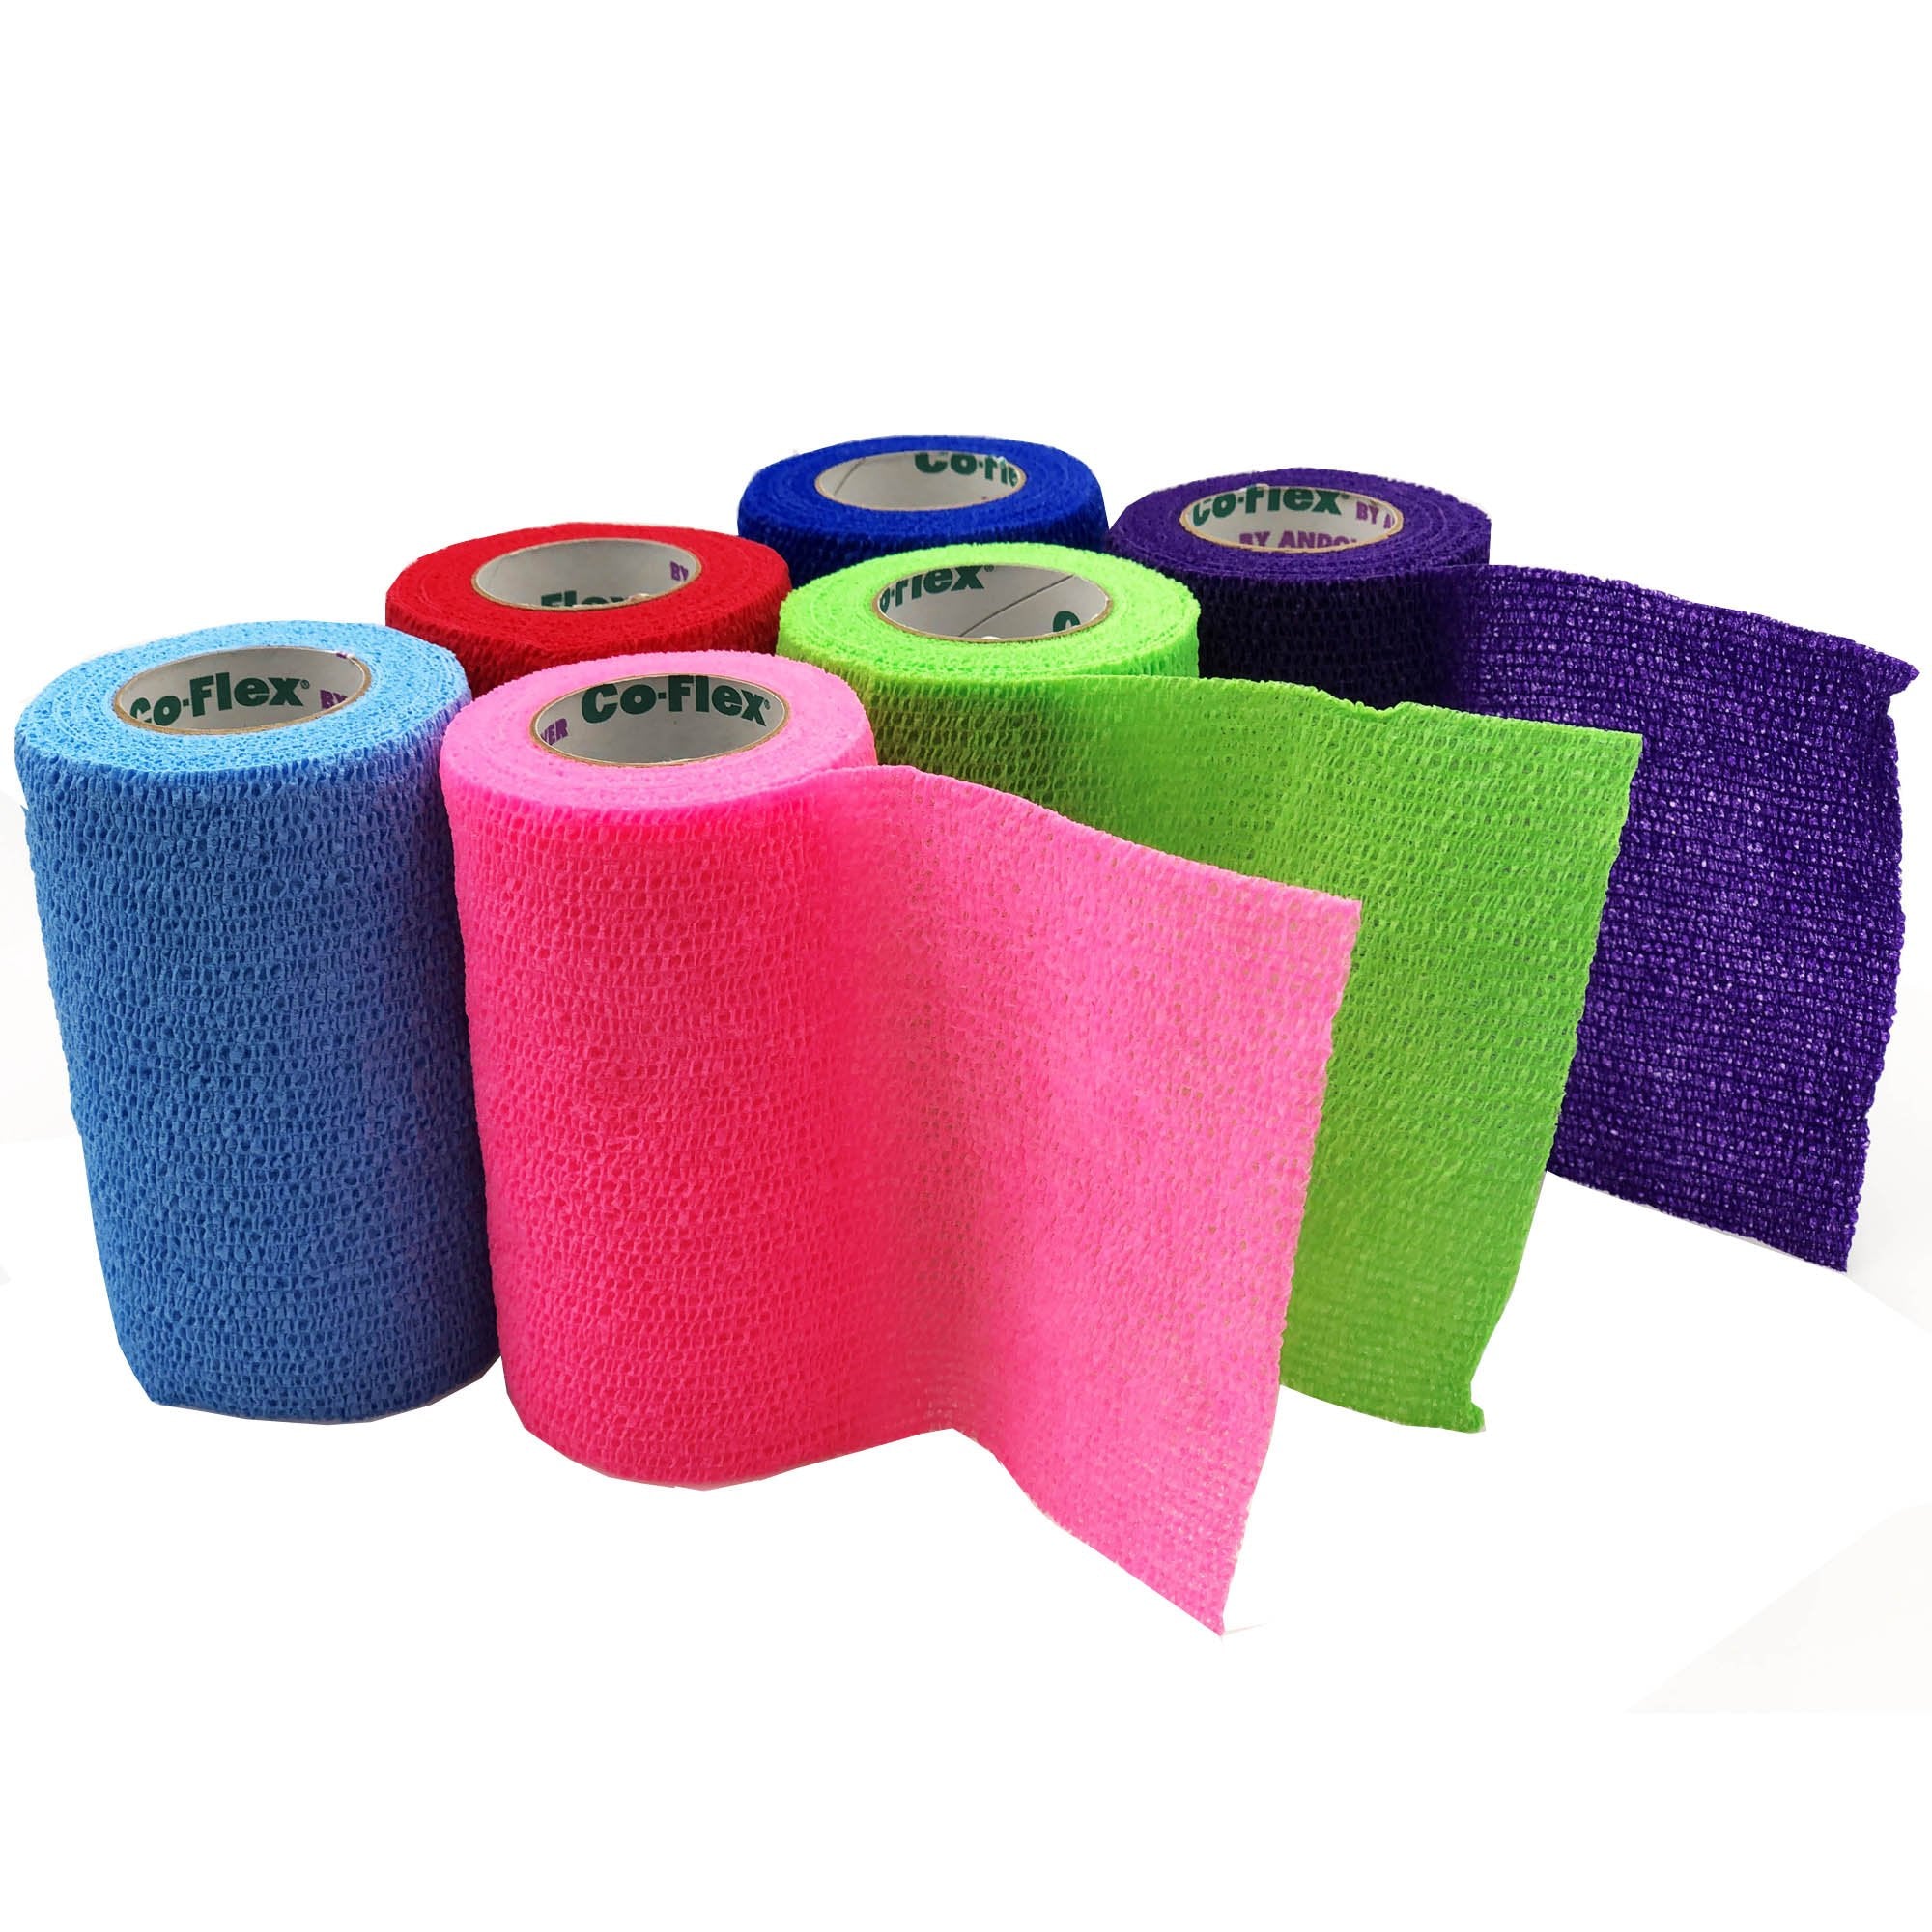 Cohesive Bandage Co-Flex®·Med 3 Inch X 5 Yard Self-Adherent Closure Neon Pink / Blue / Purple / Light Blue / Neon Green / Red NonSterile 16 lbs. Tensile Strength